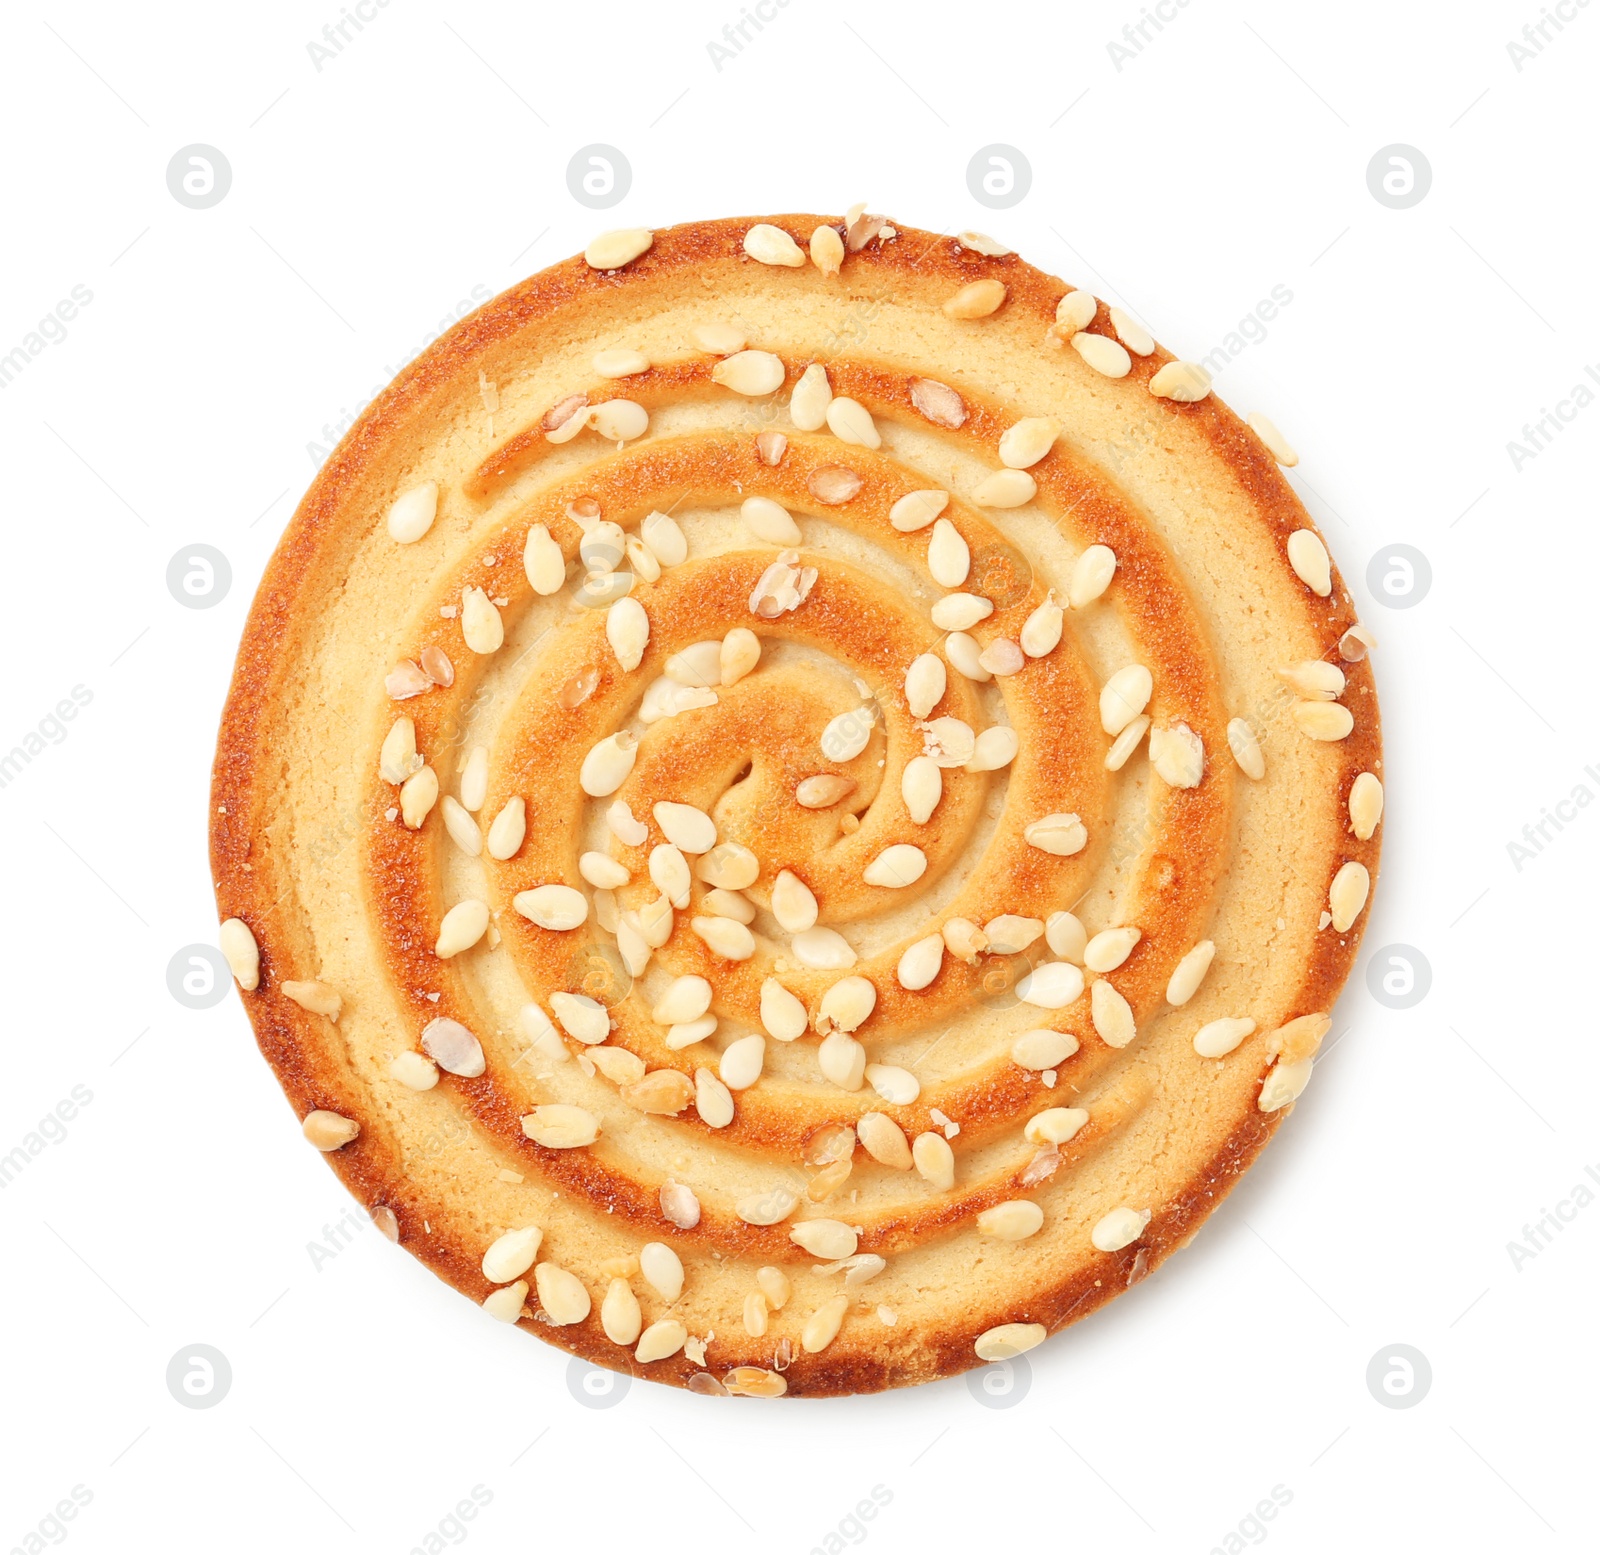 Photo of Grain cereal cookie on white background. Healthy snack